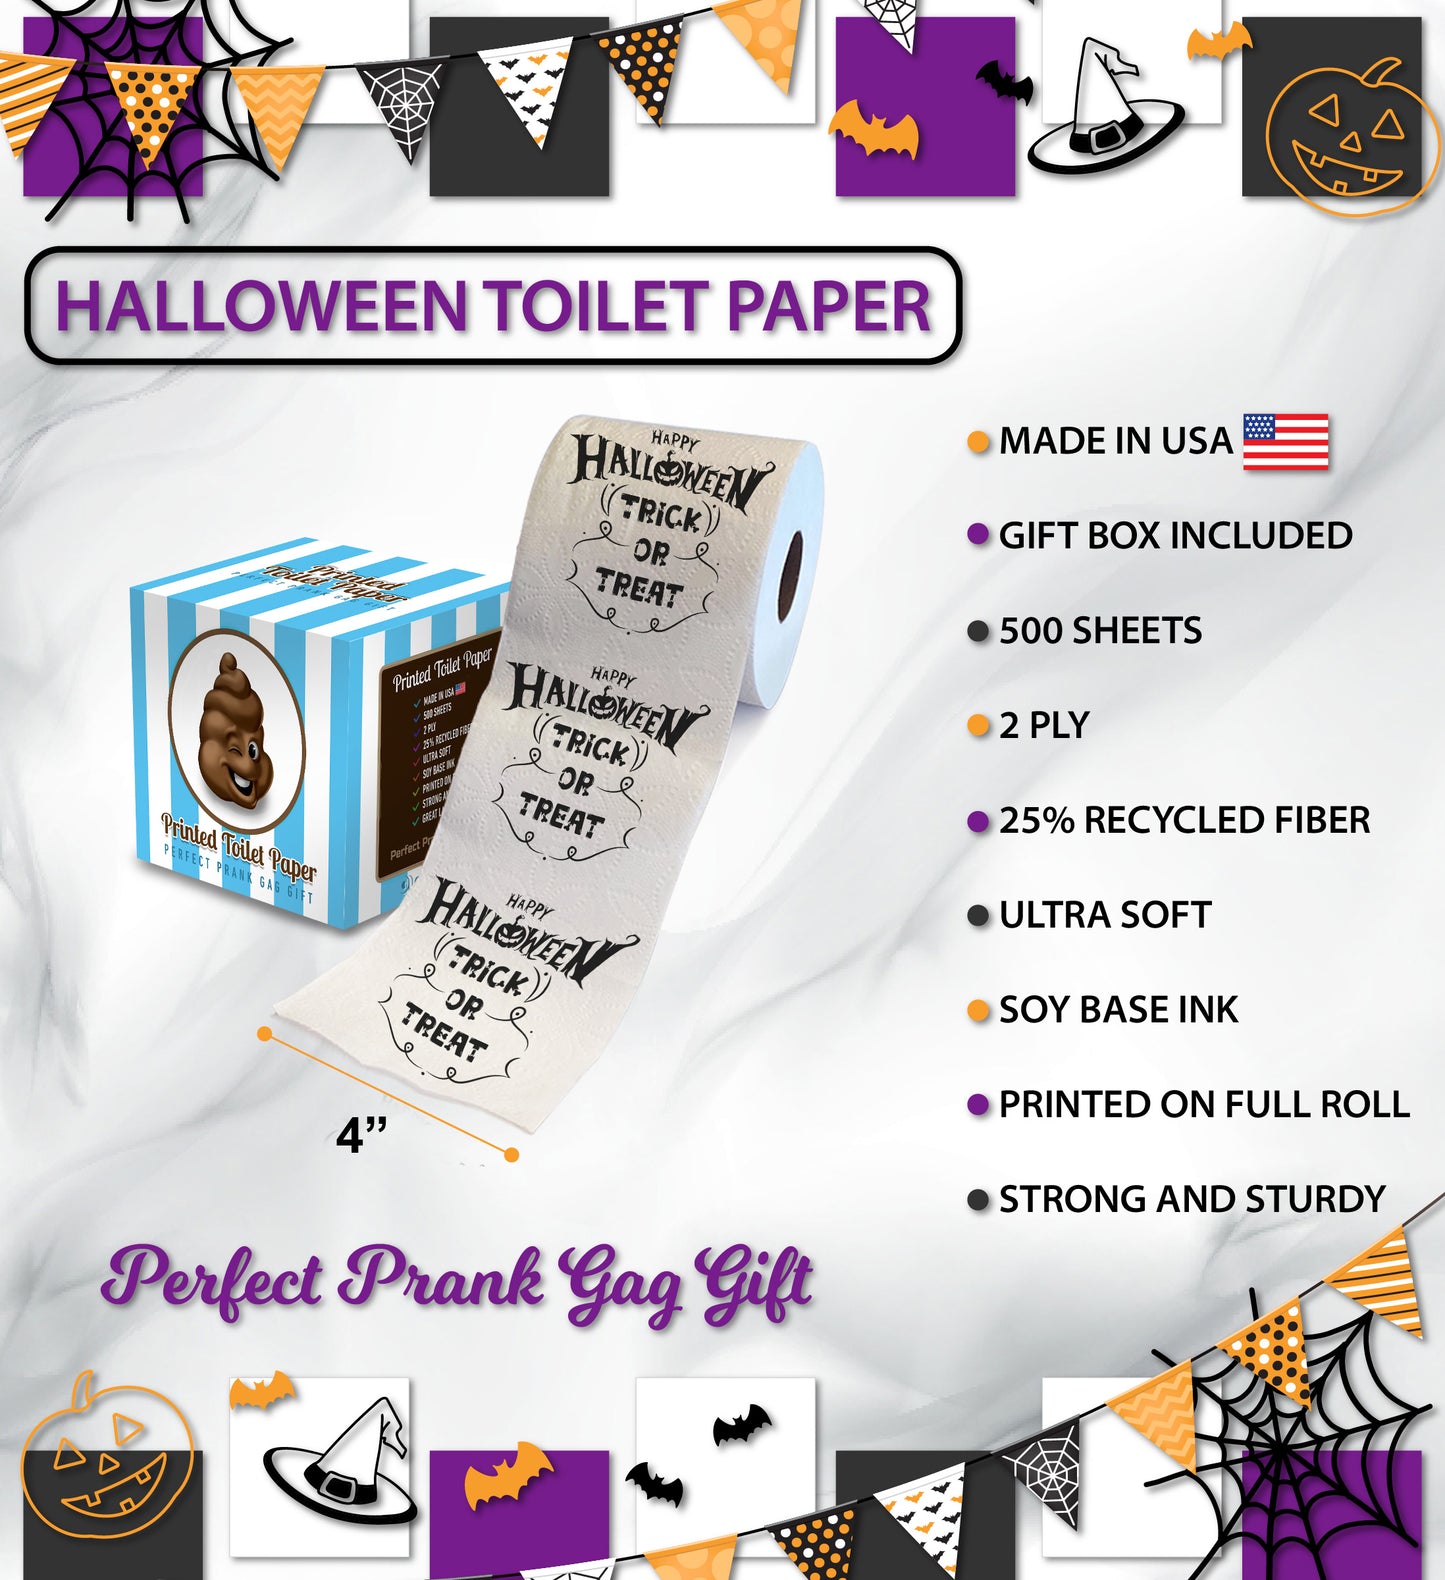 Printed TP Happy Halloween Trick or Treat Printed Toilet Paper Gift – 500 Sheet